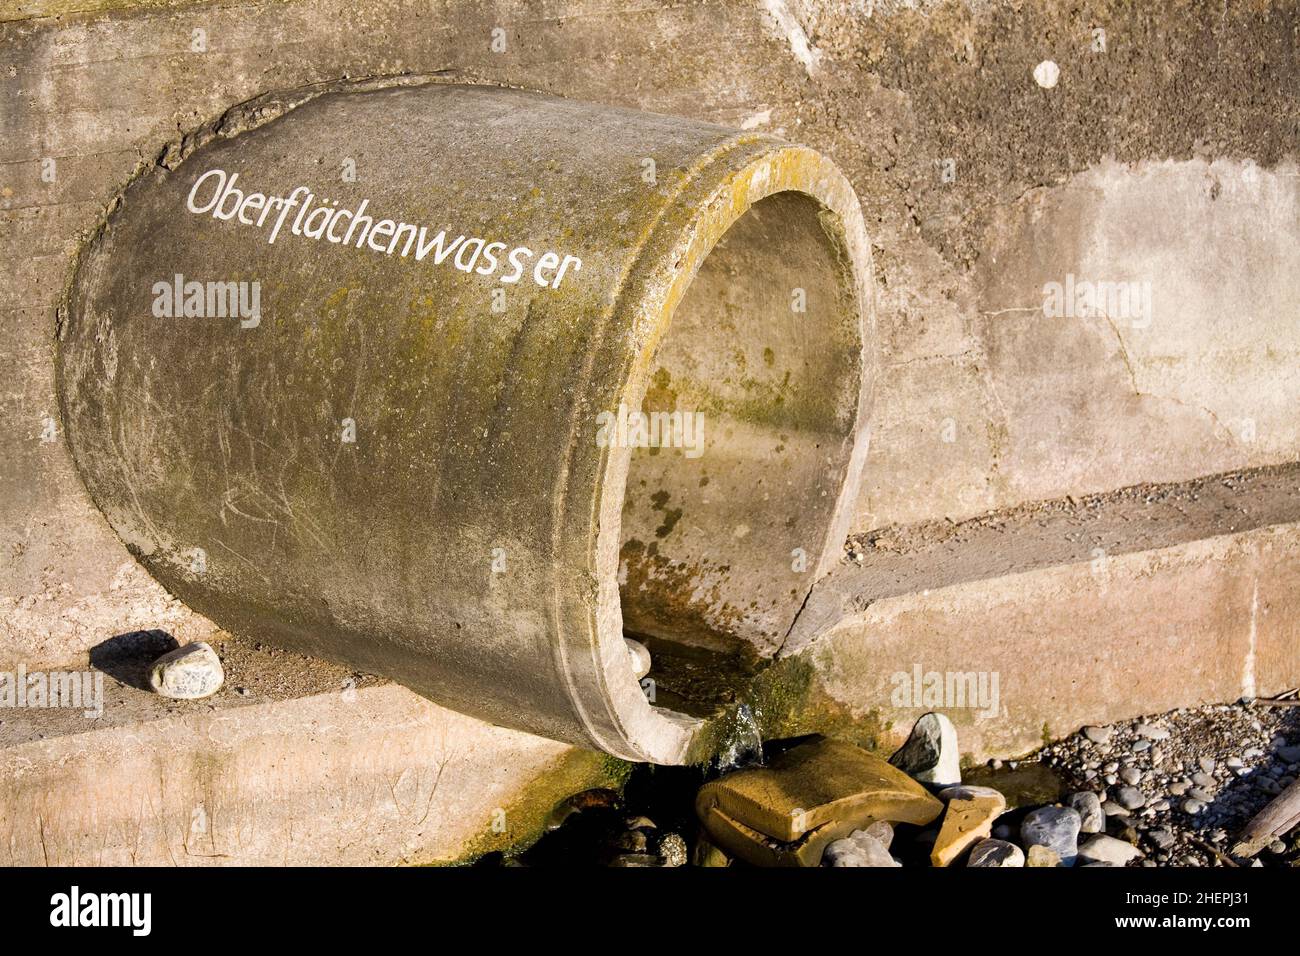 drain pipe with the label surface water, Germany Stock Photo